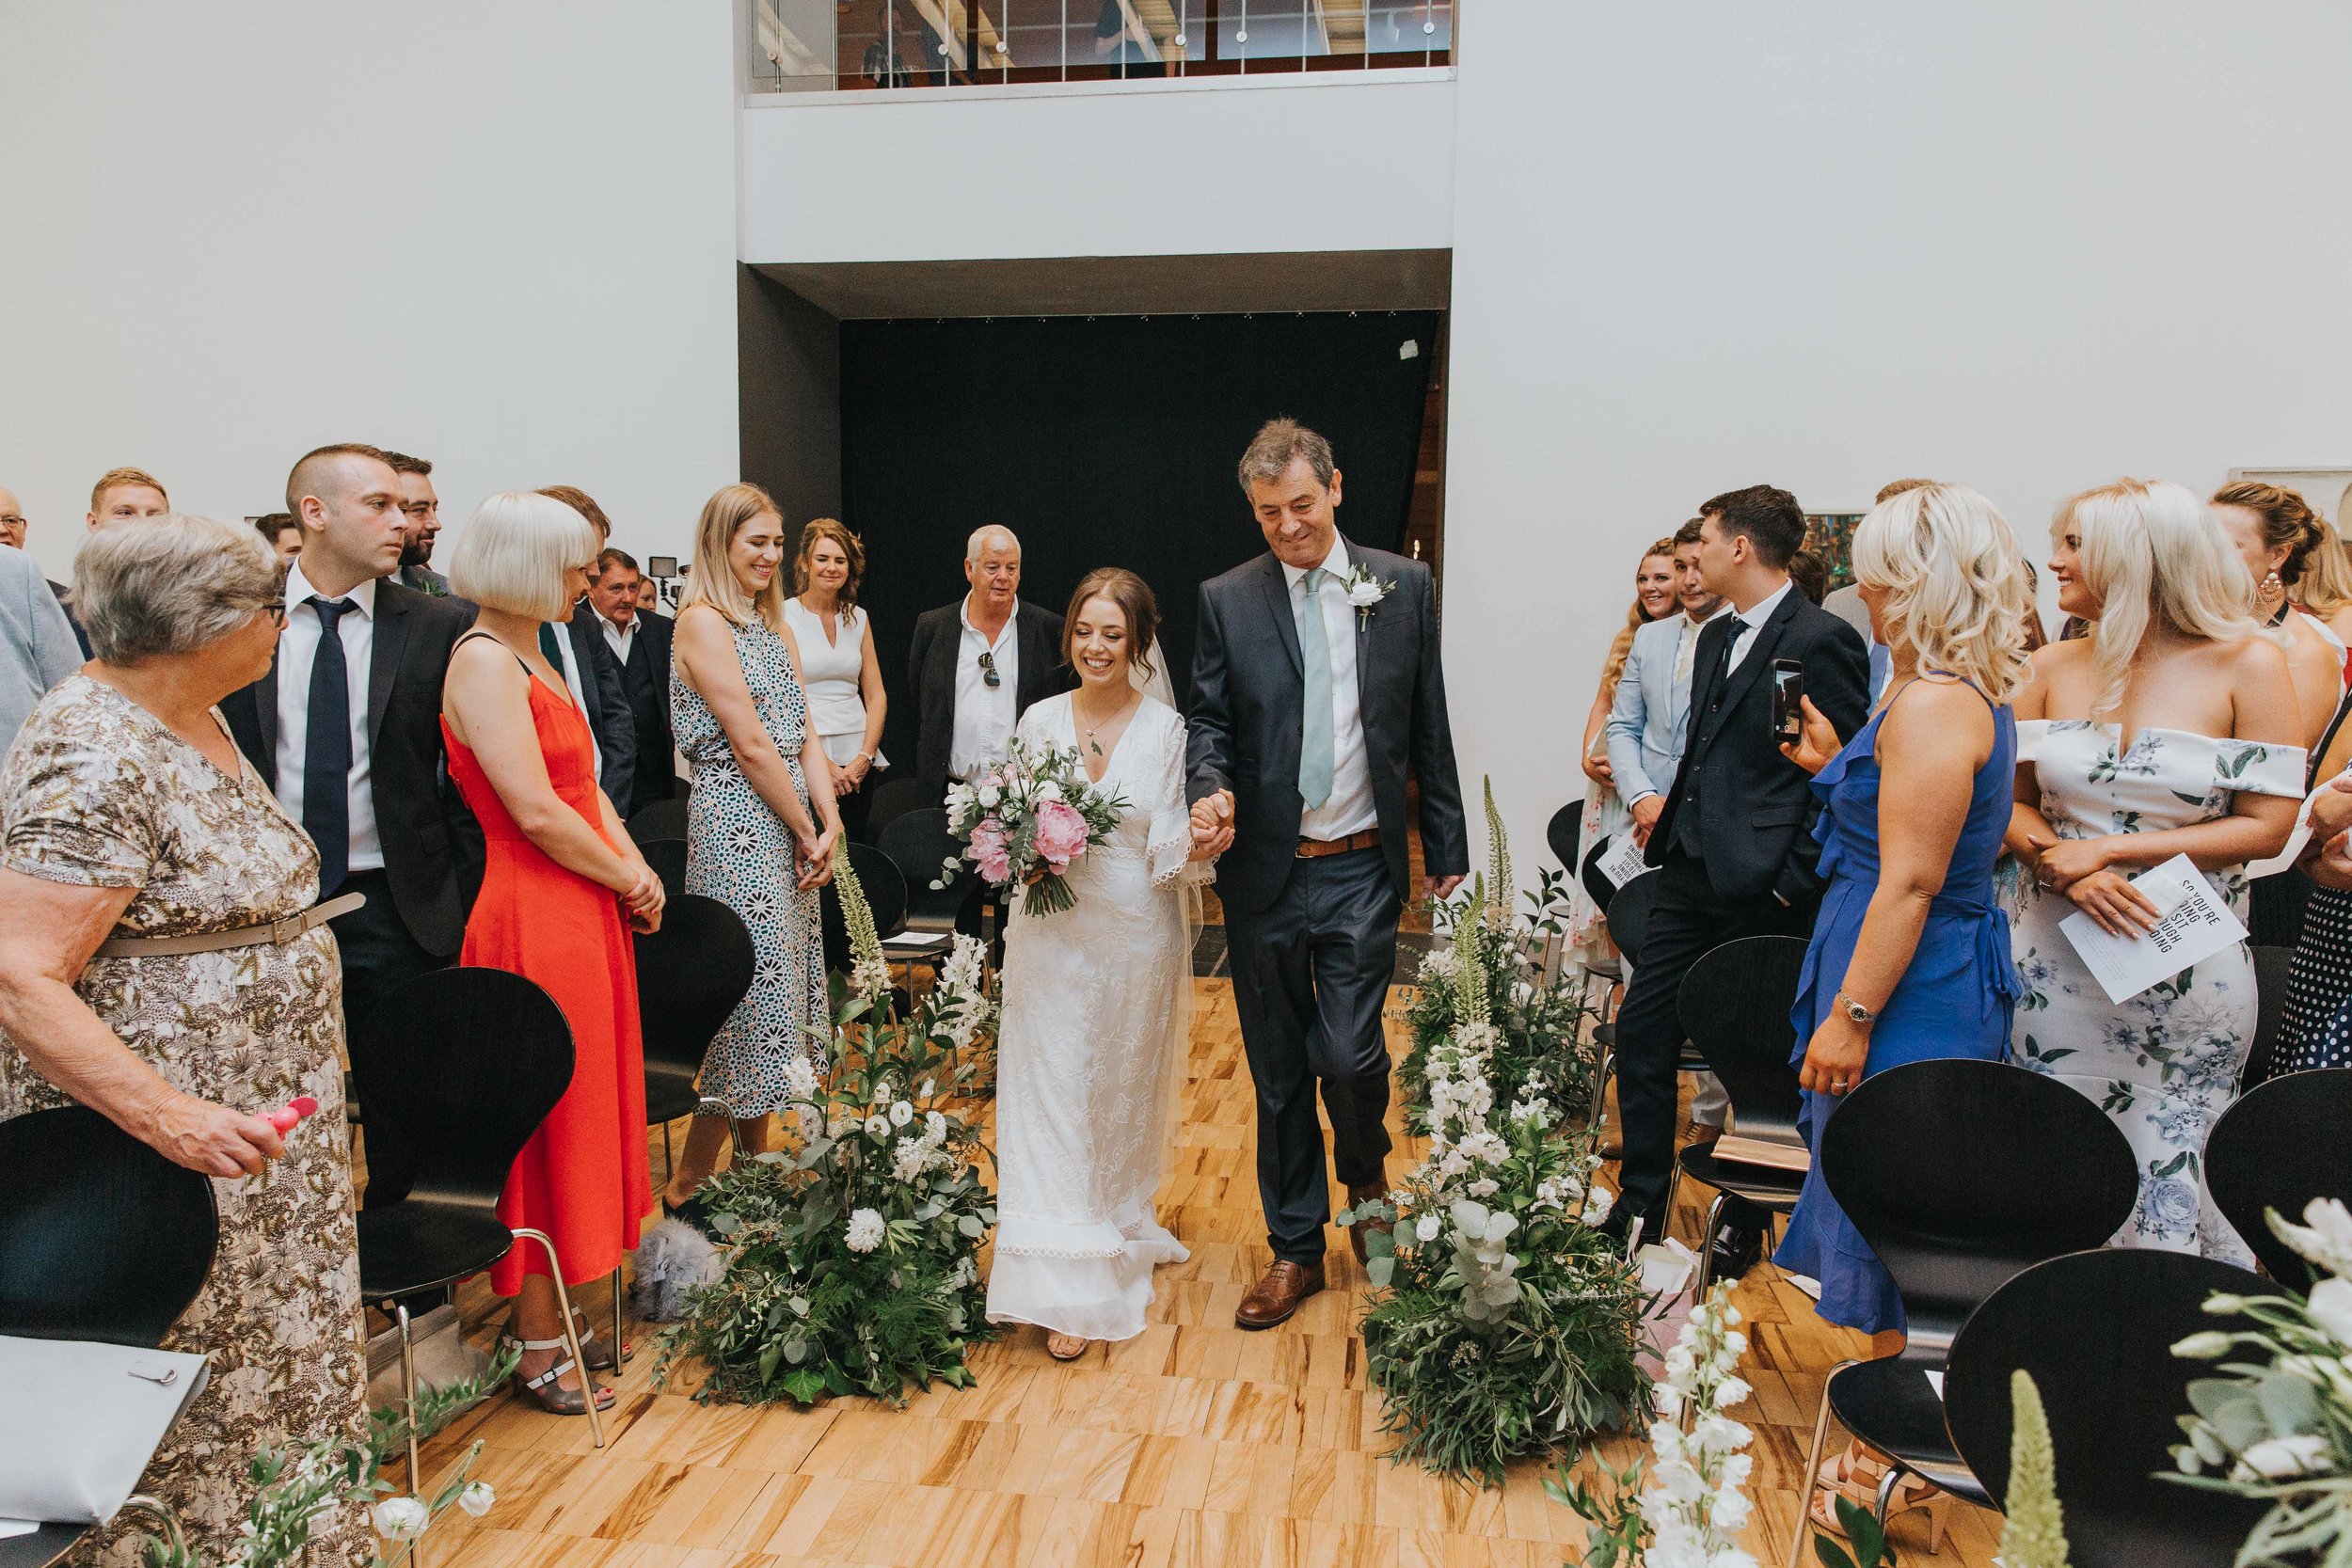 The Whitworth Art Gallery Manchester wedding ceremony